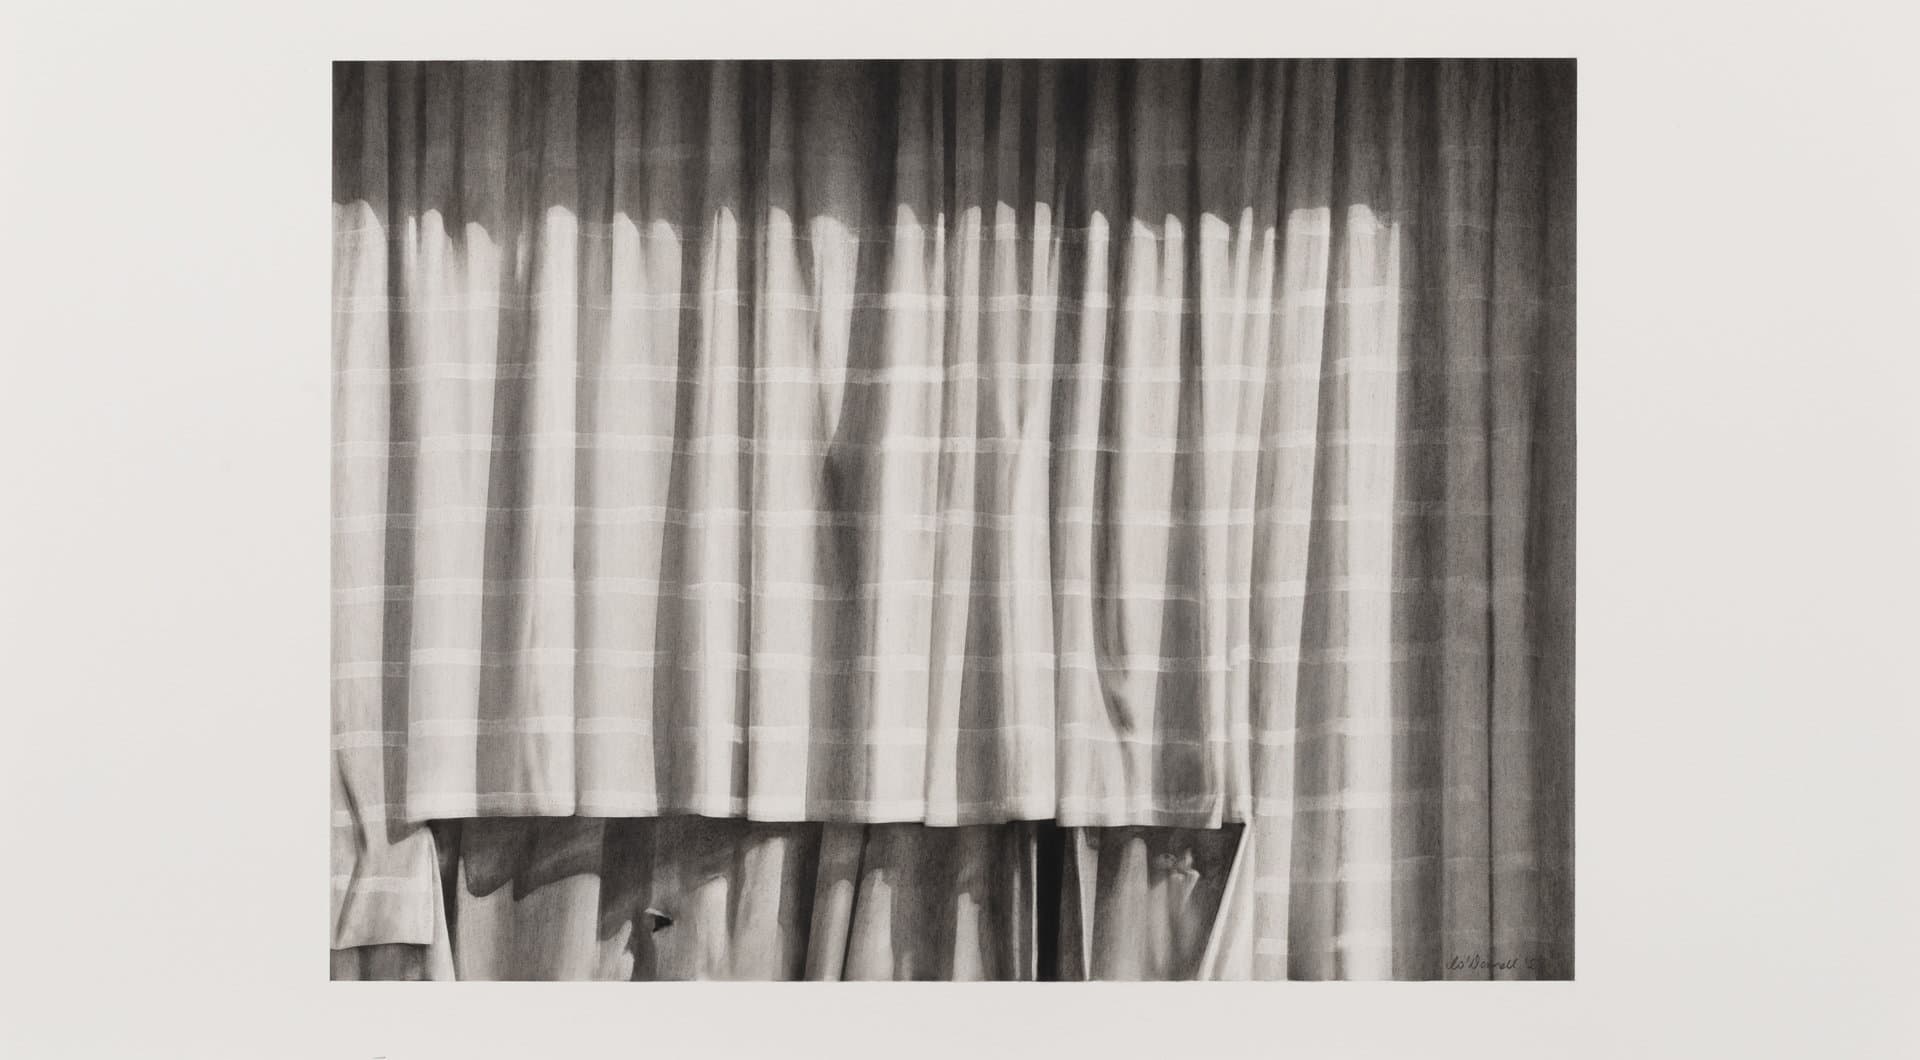 ‘Striped Curtains’, 2023, charcoal on paper, 42 x 77 cm, unframed